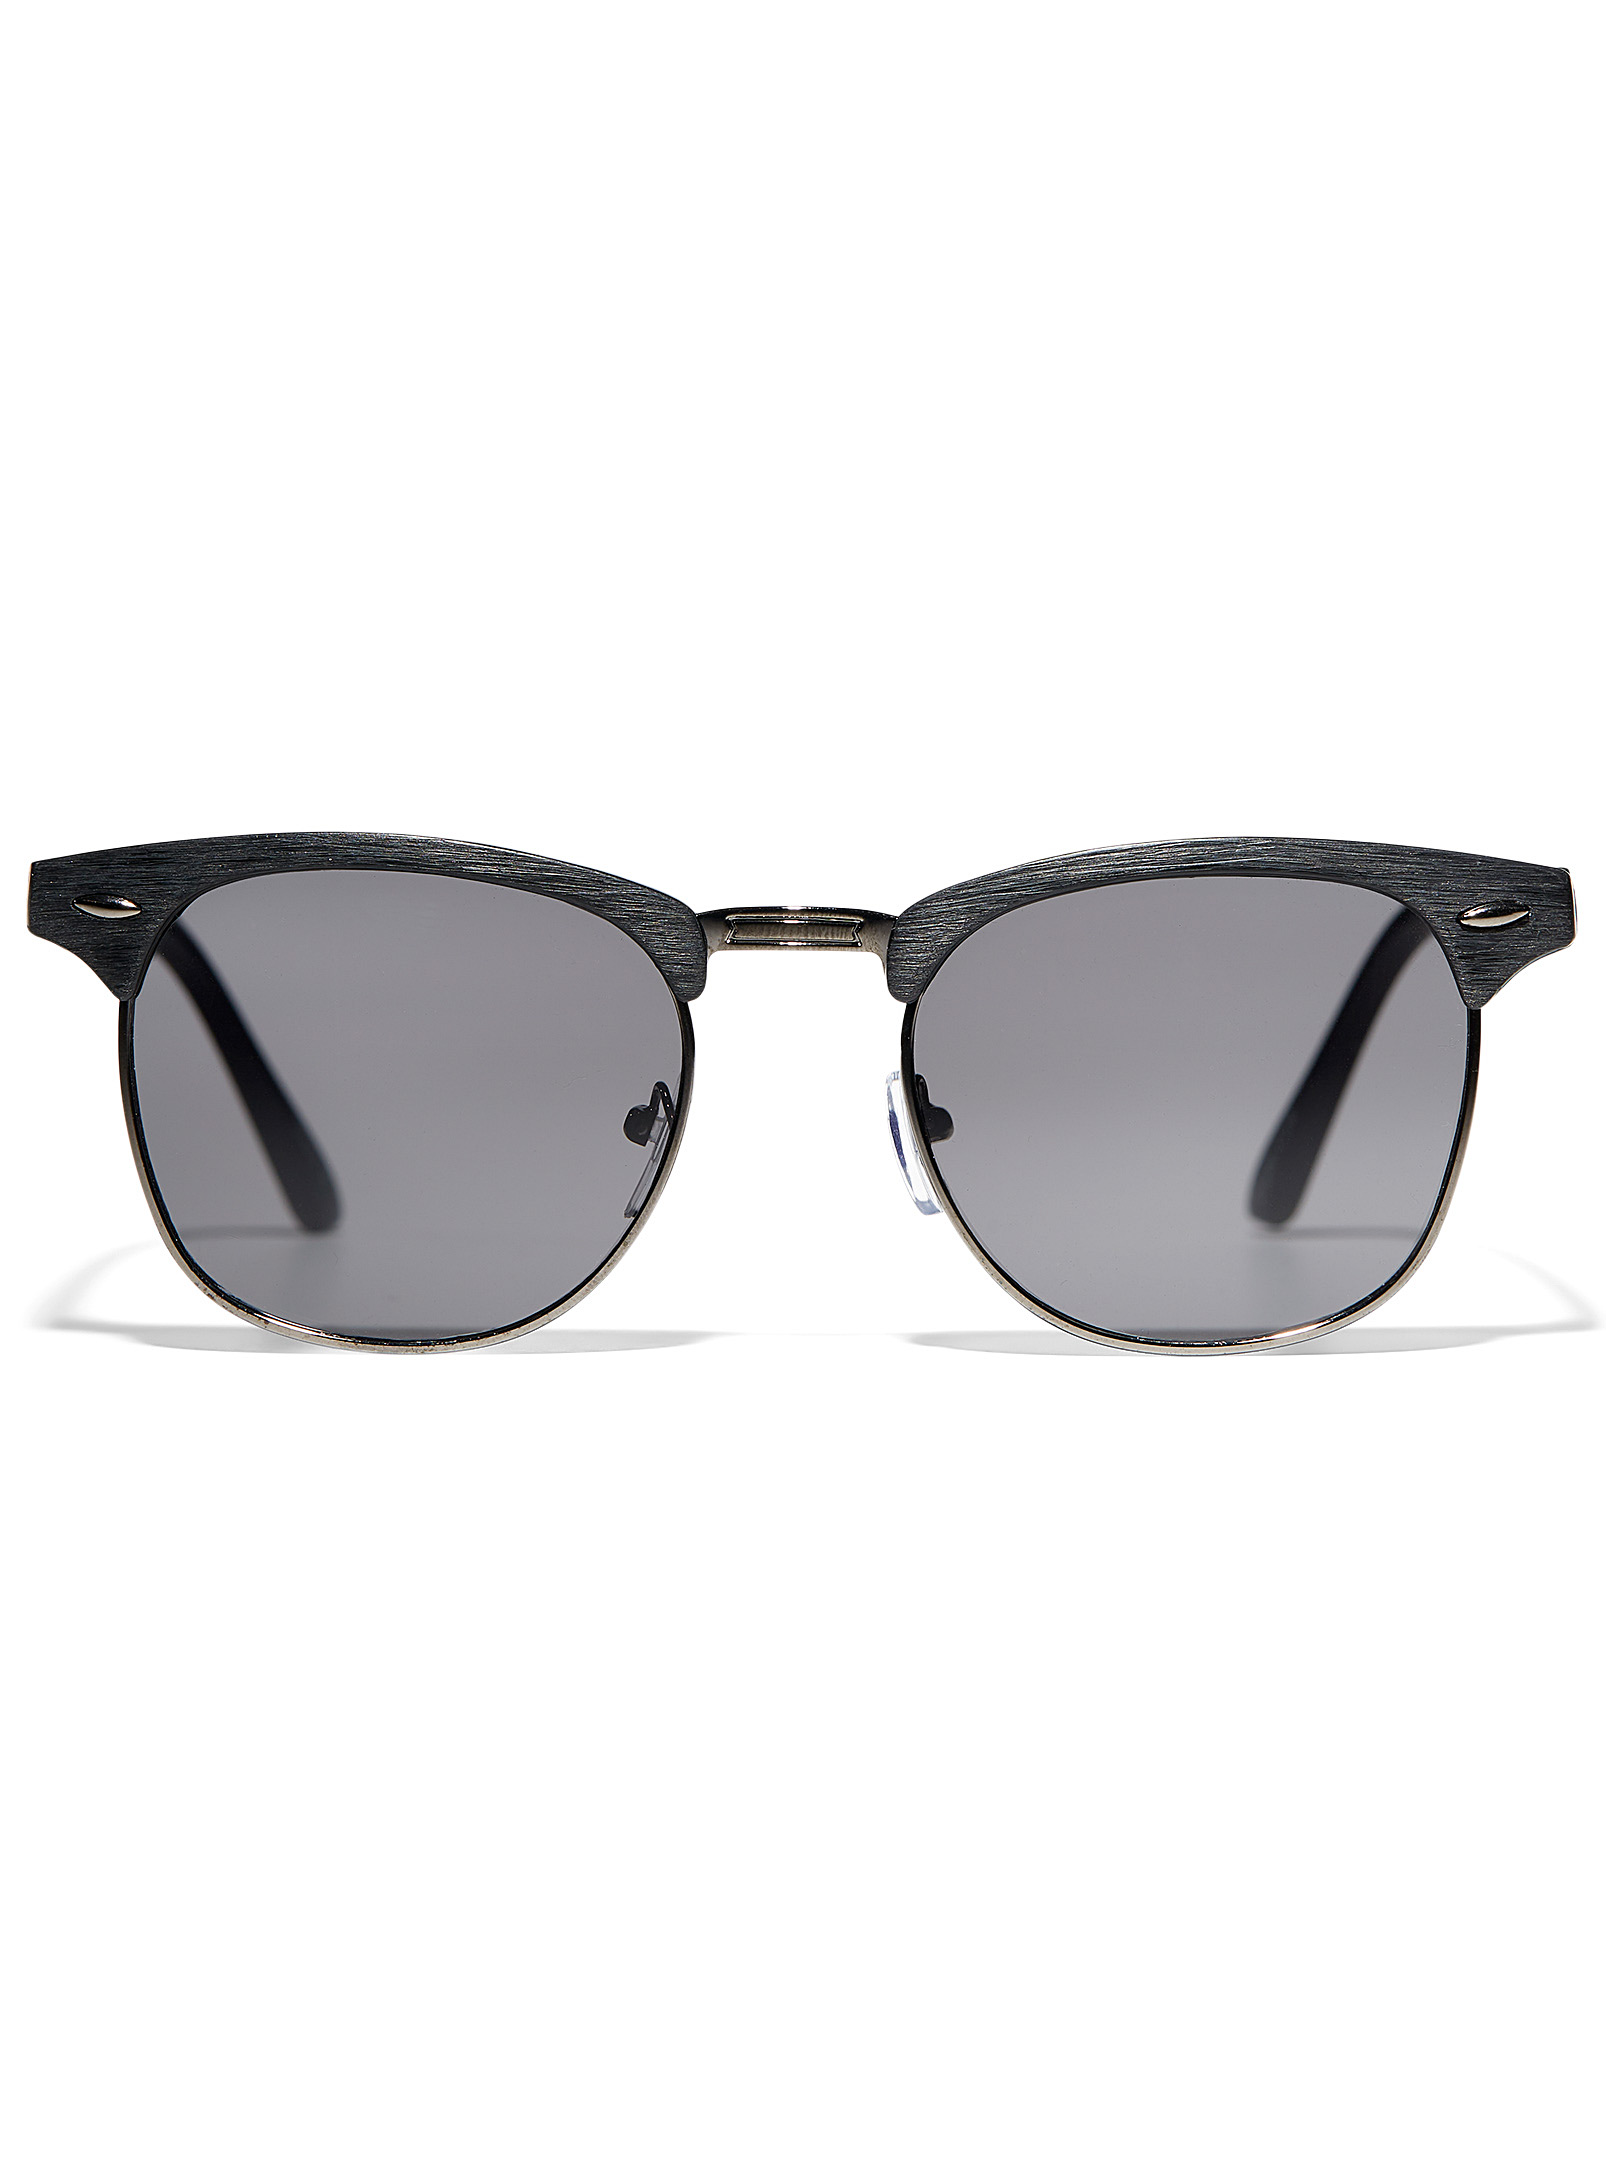 Le 31 Club Round Sunglasses In Charcoal